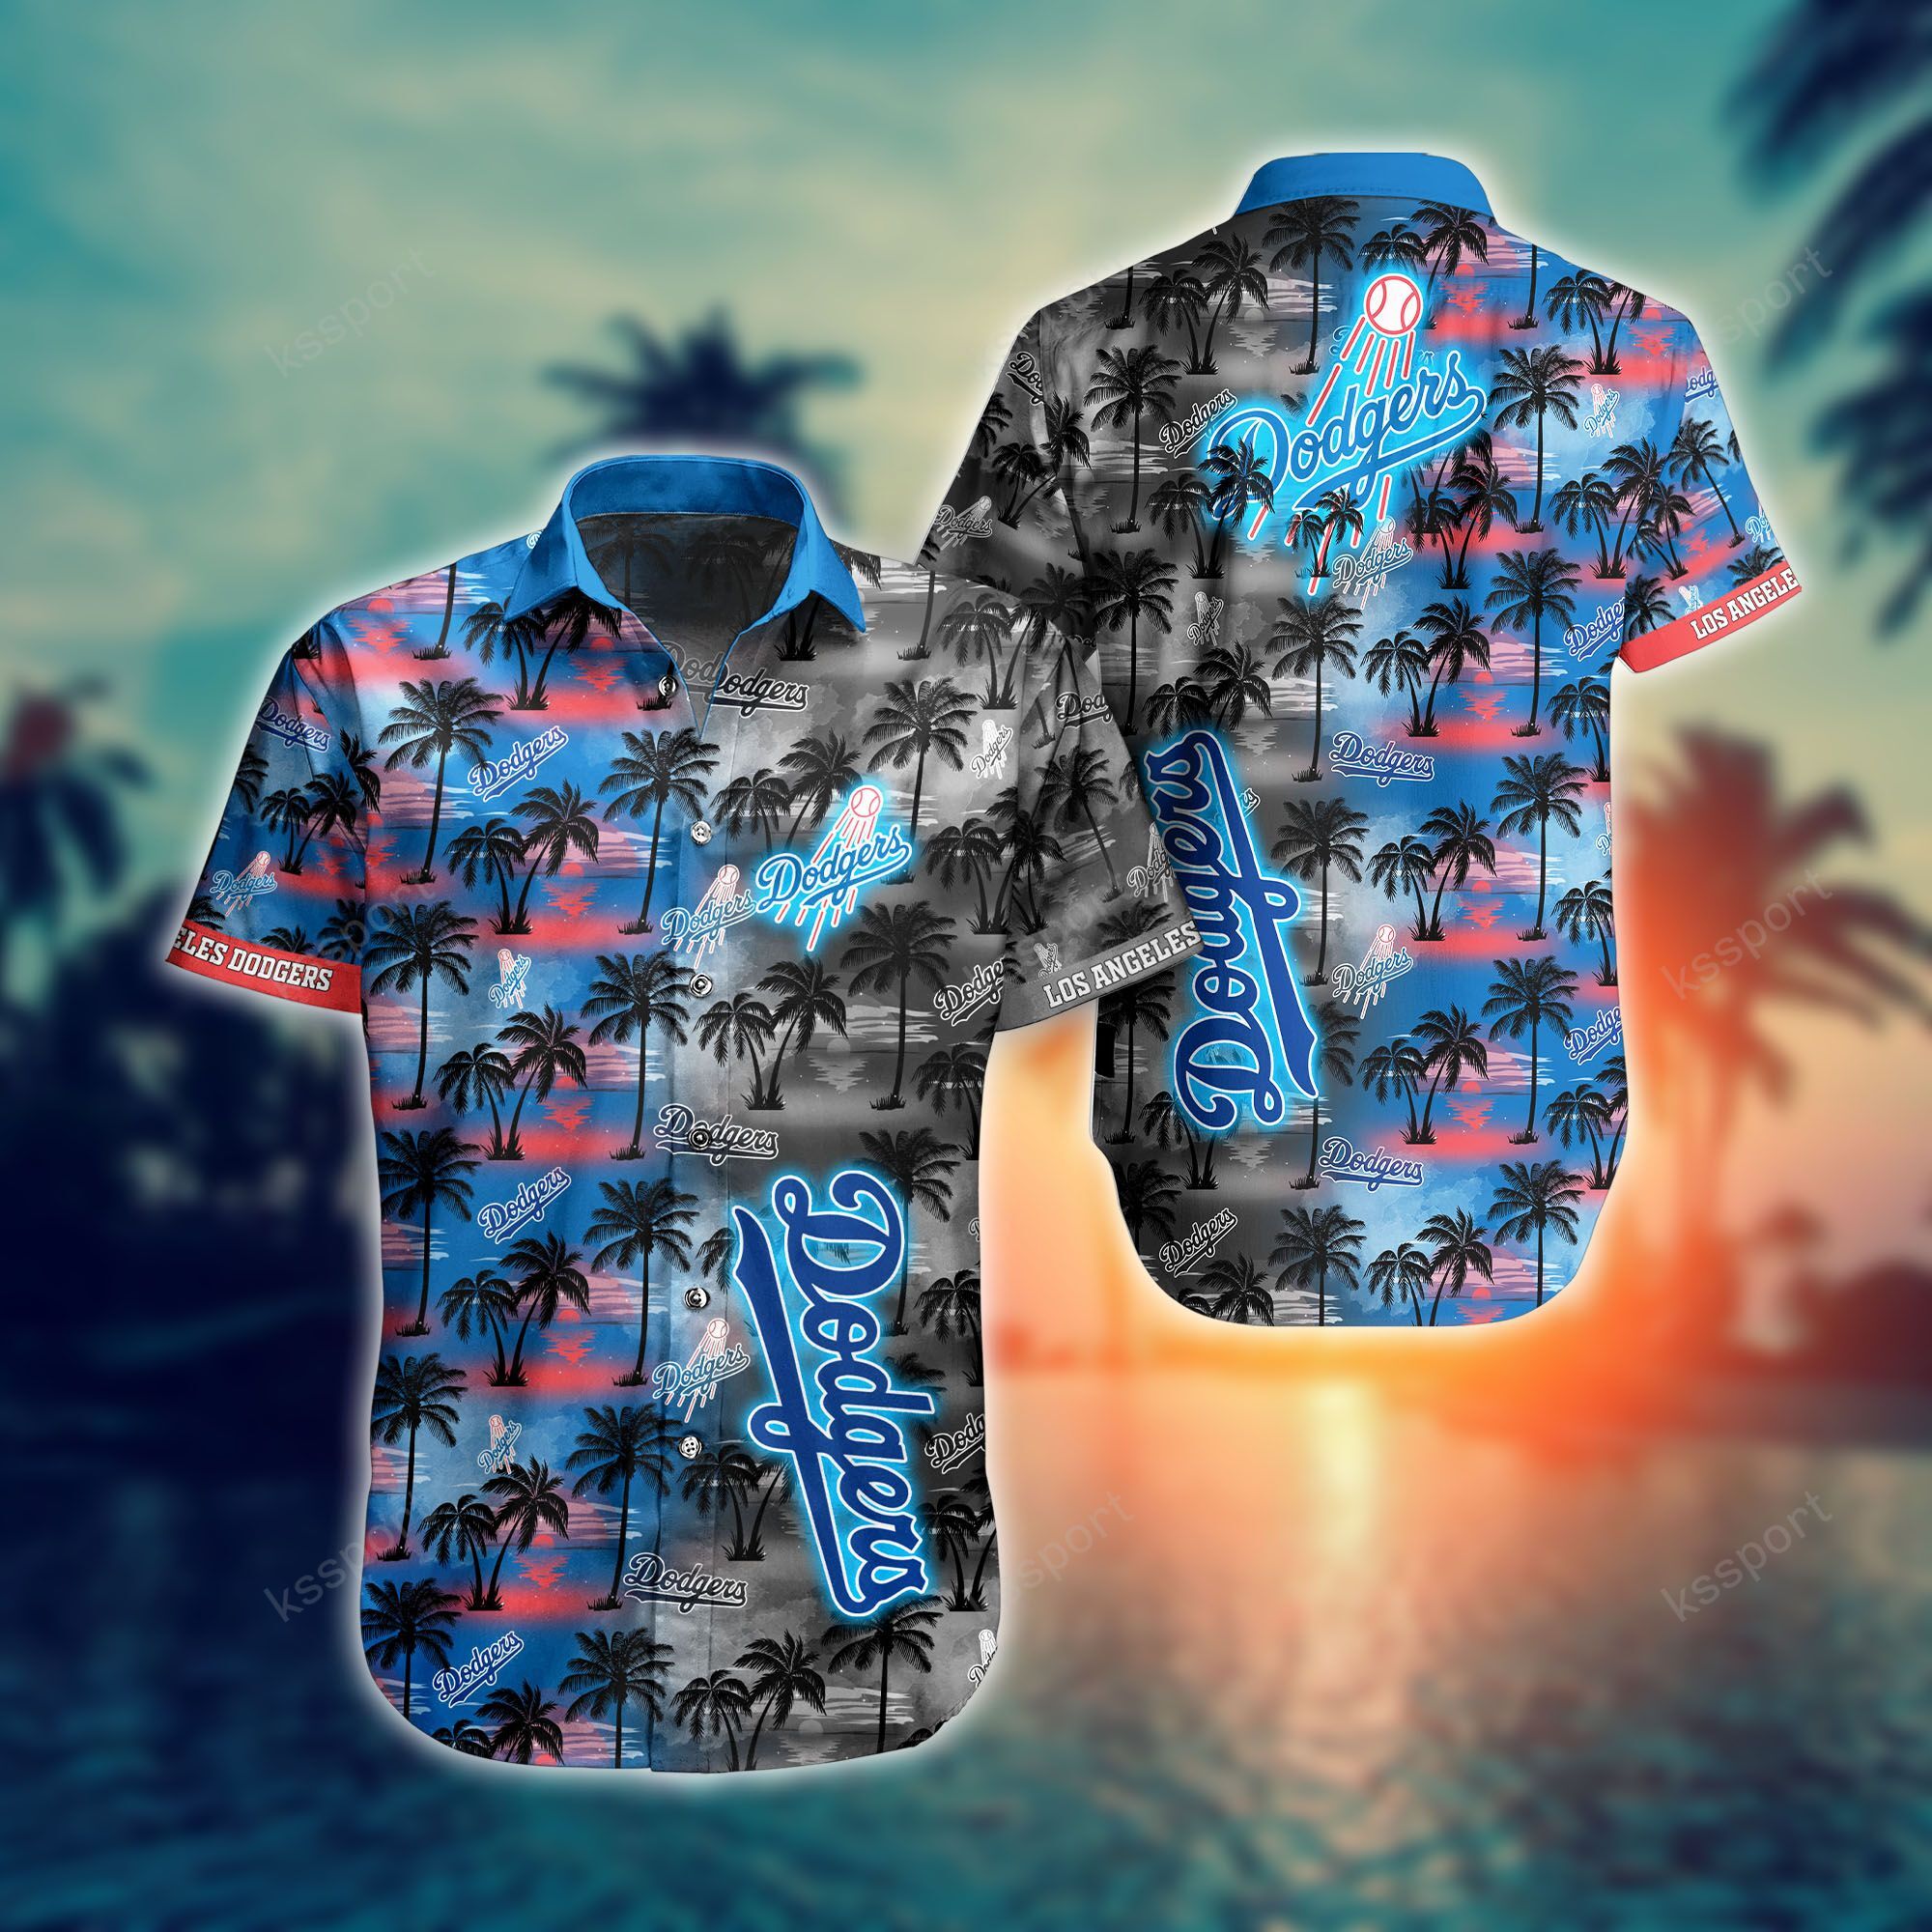 Treat yourself to a cool Hawaiian set today! 123